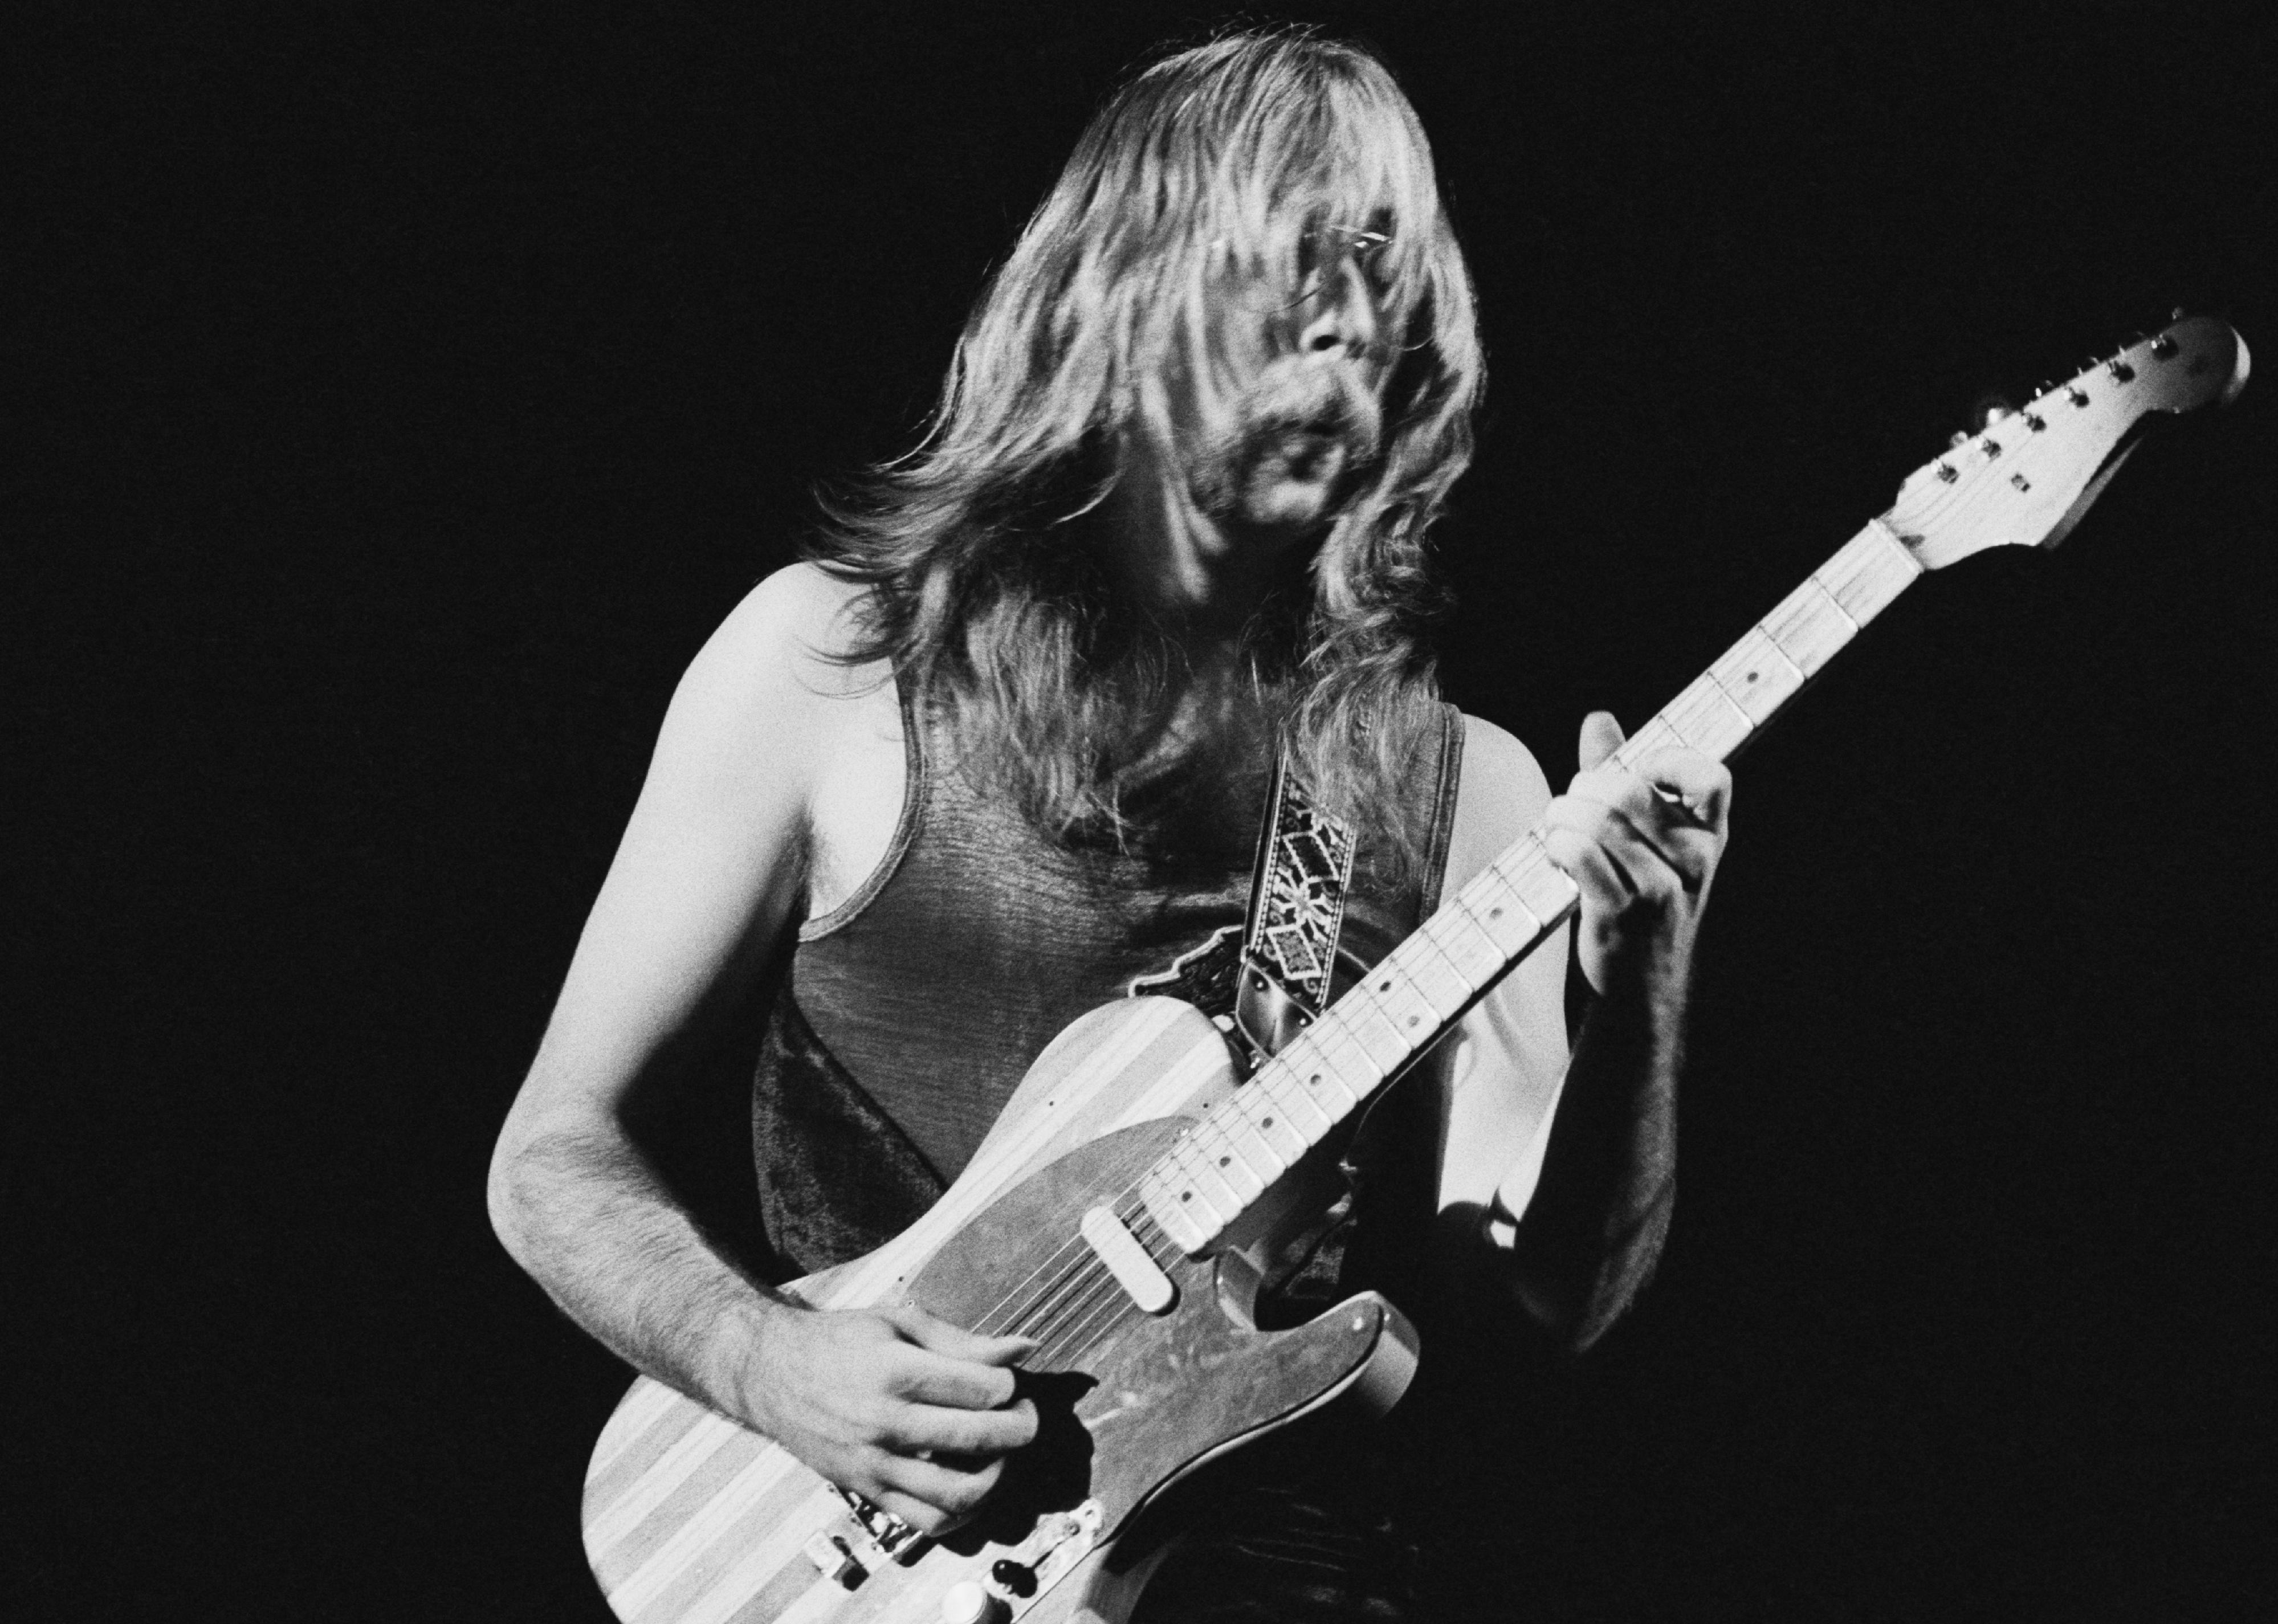 Guitarist Jeff 'Skunk' Baxter performing with Steely Dan at the Rainbow Theatre in London.